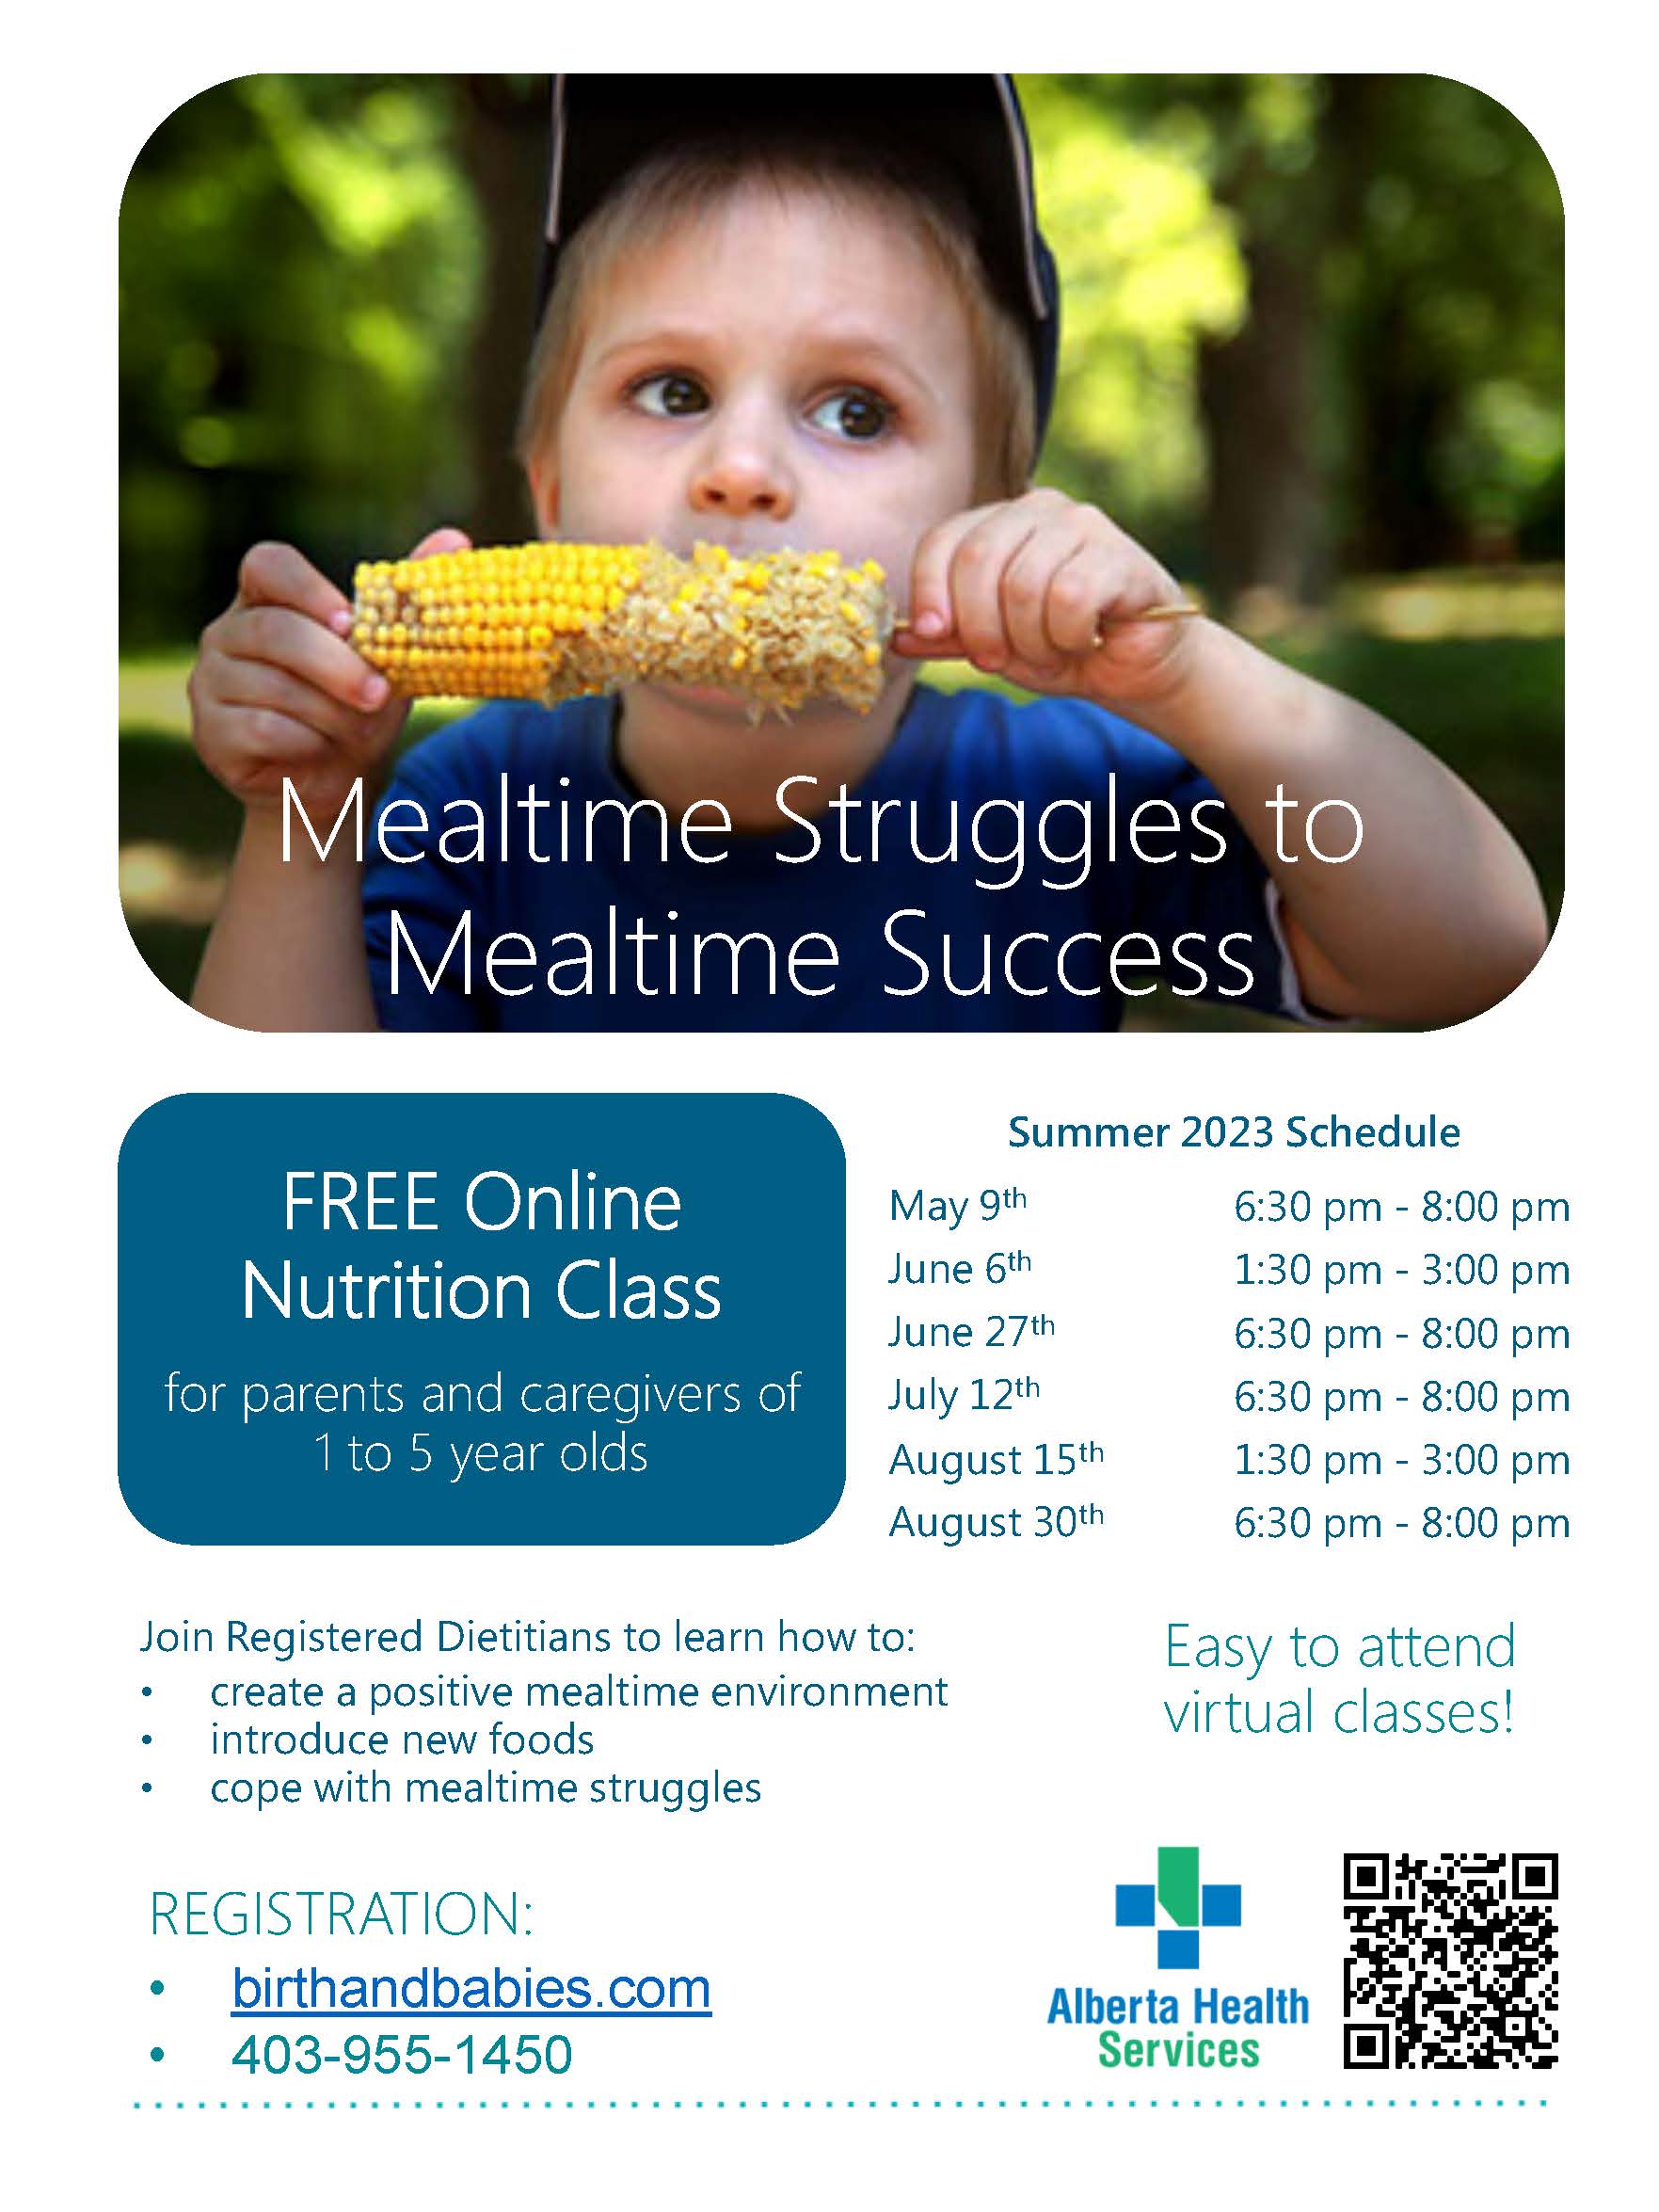 Free Online Nutrition classes from AHS